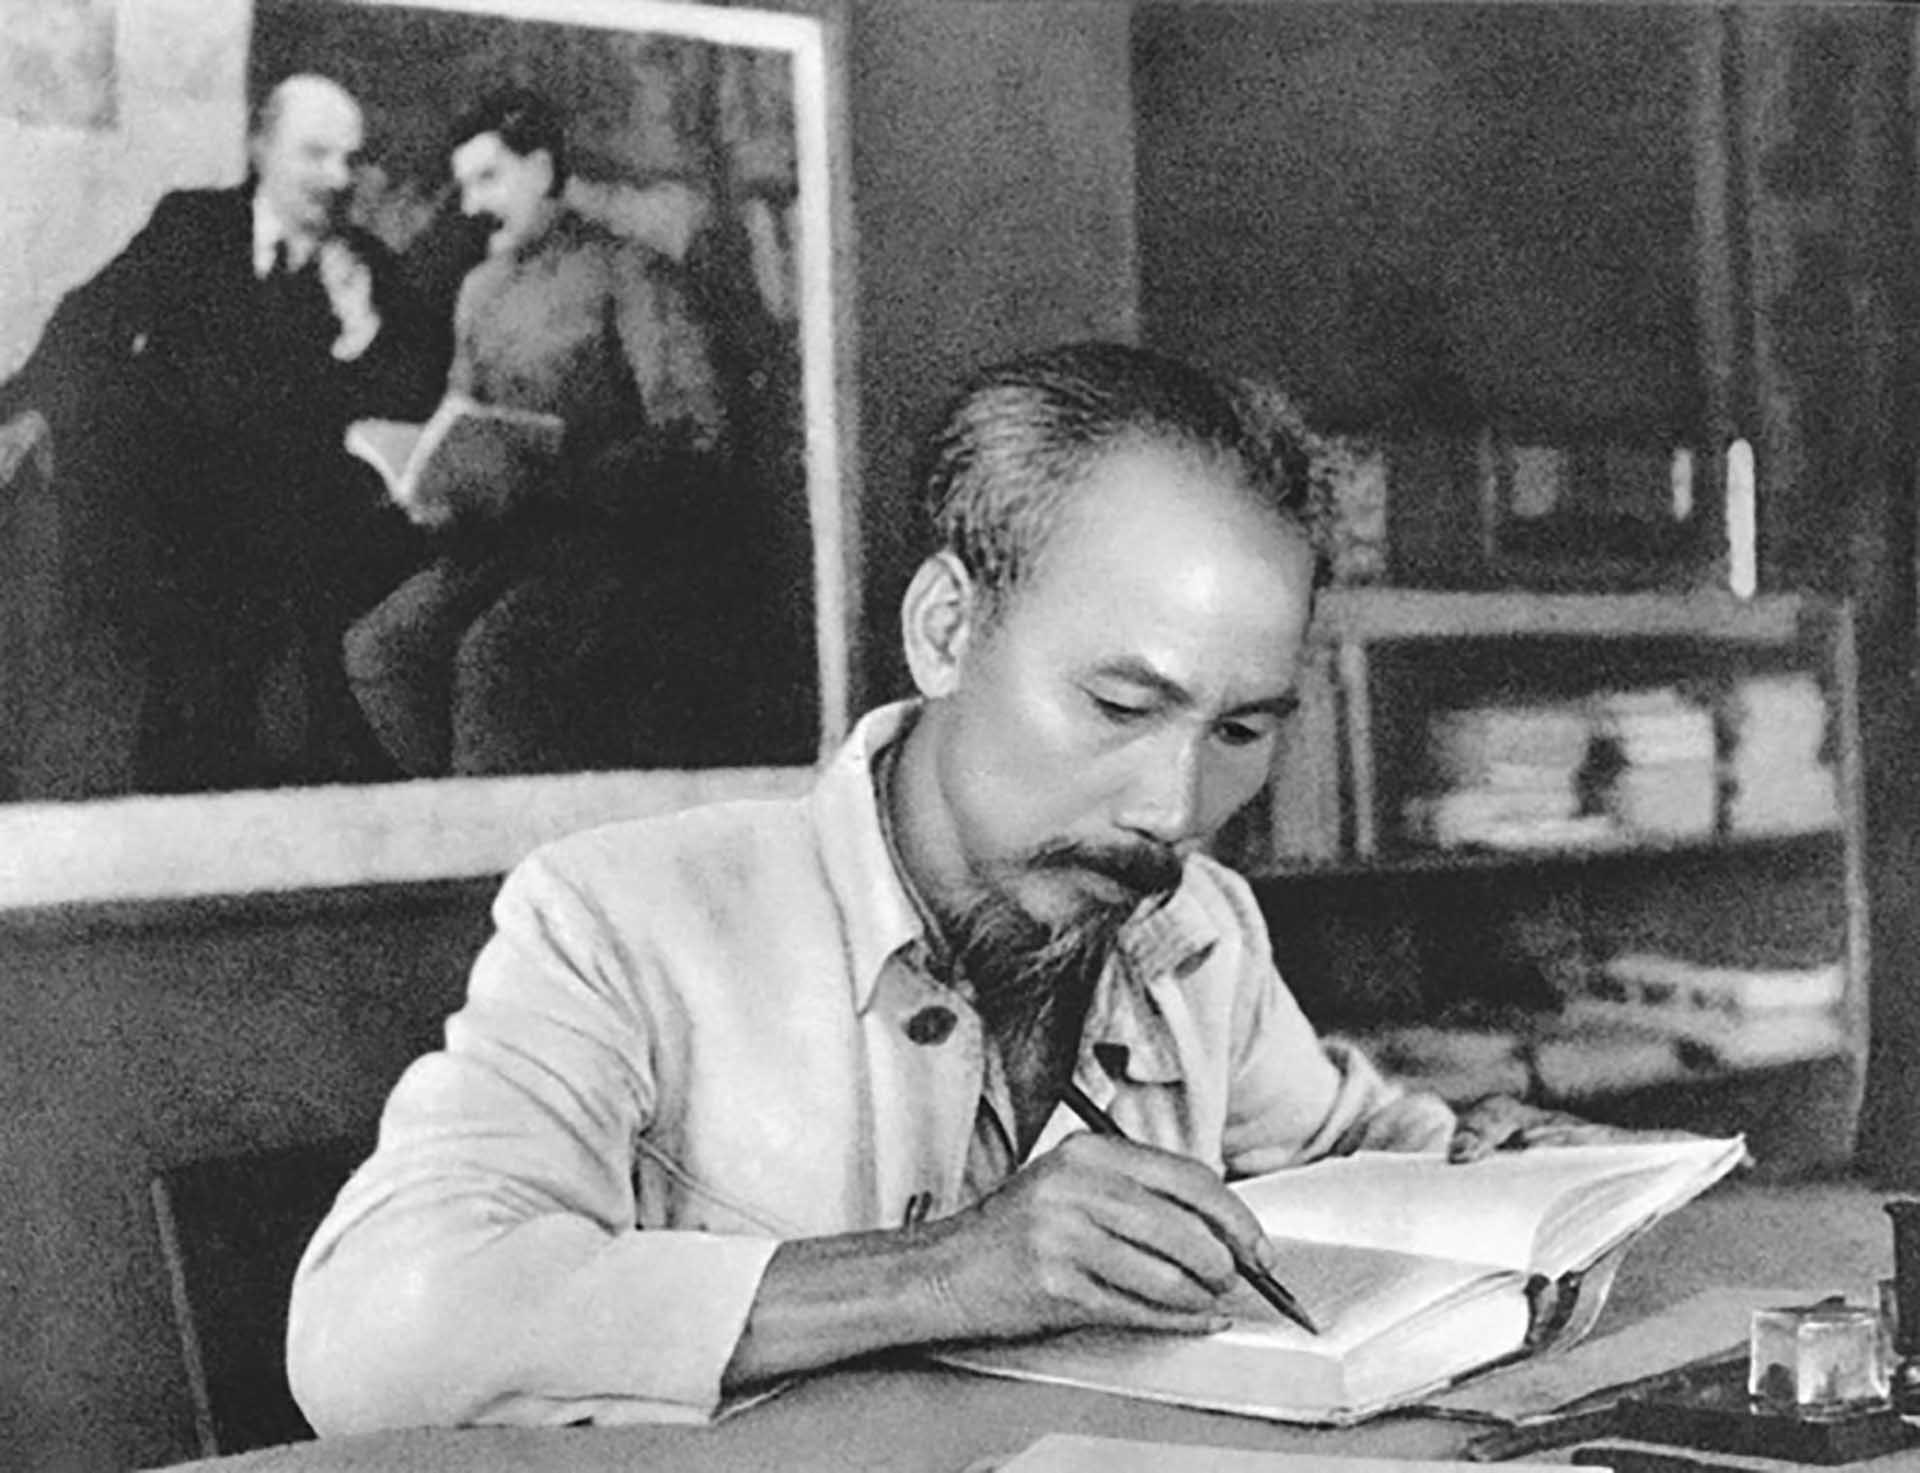 Ho Chi Minh's ideology on dignity and human rights